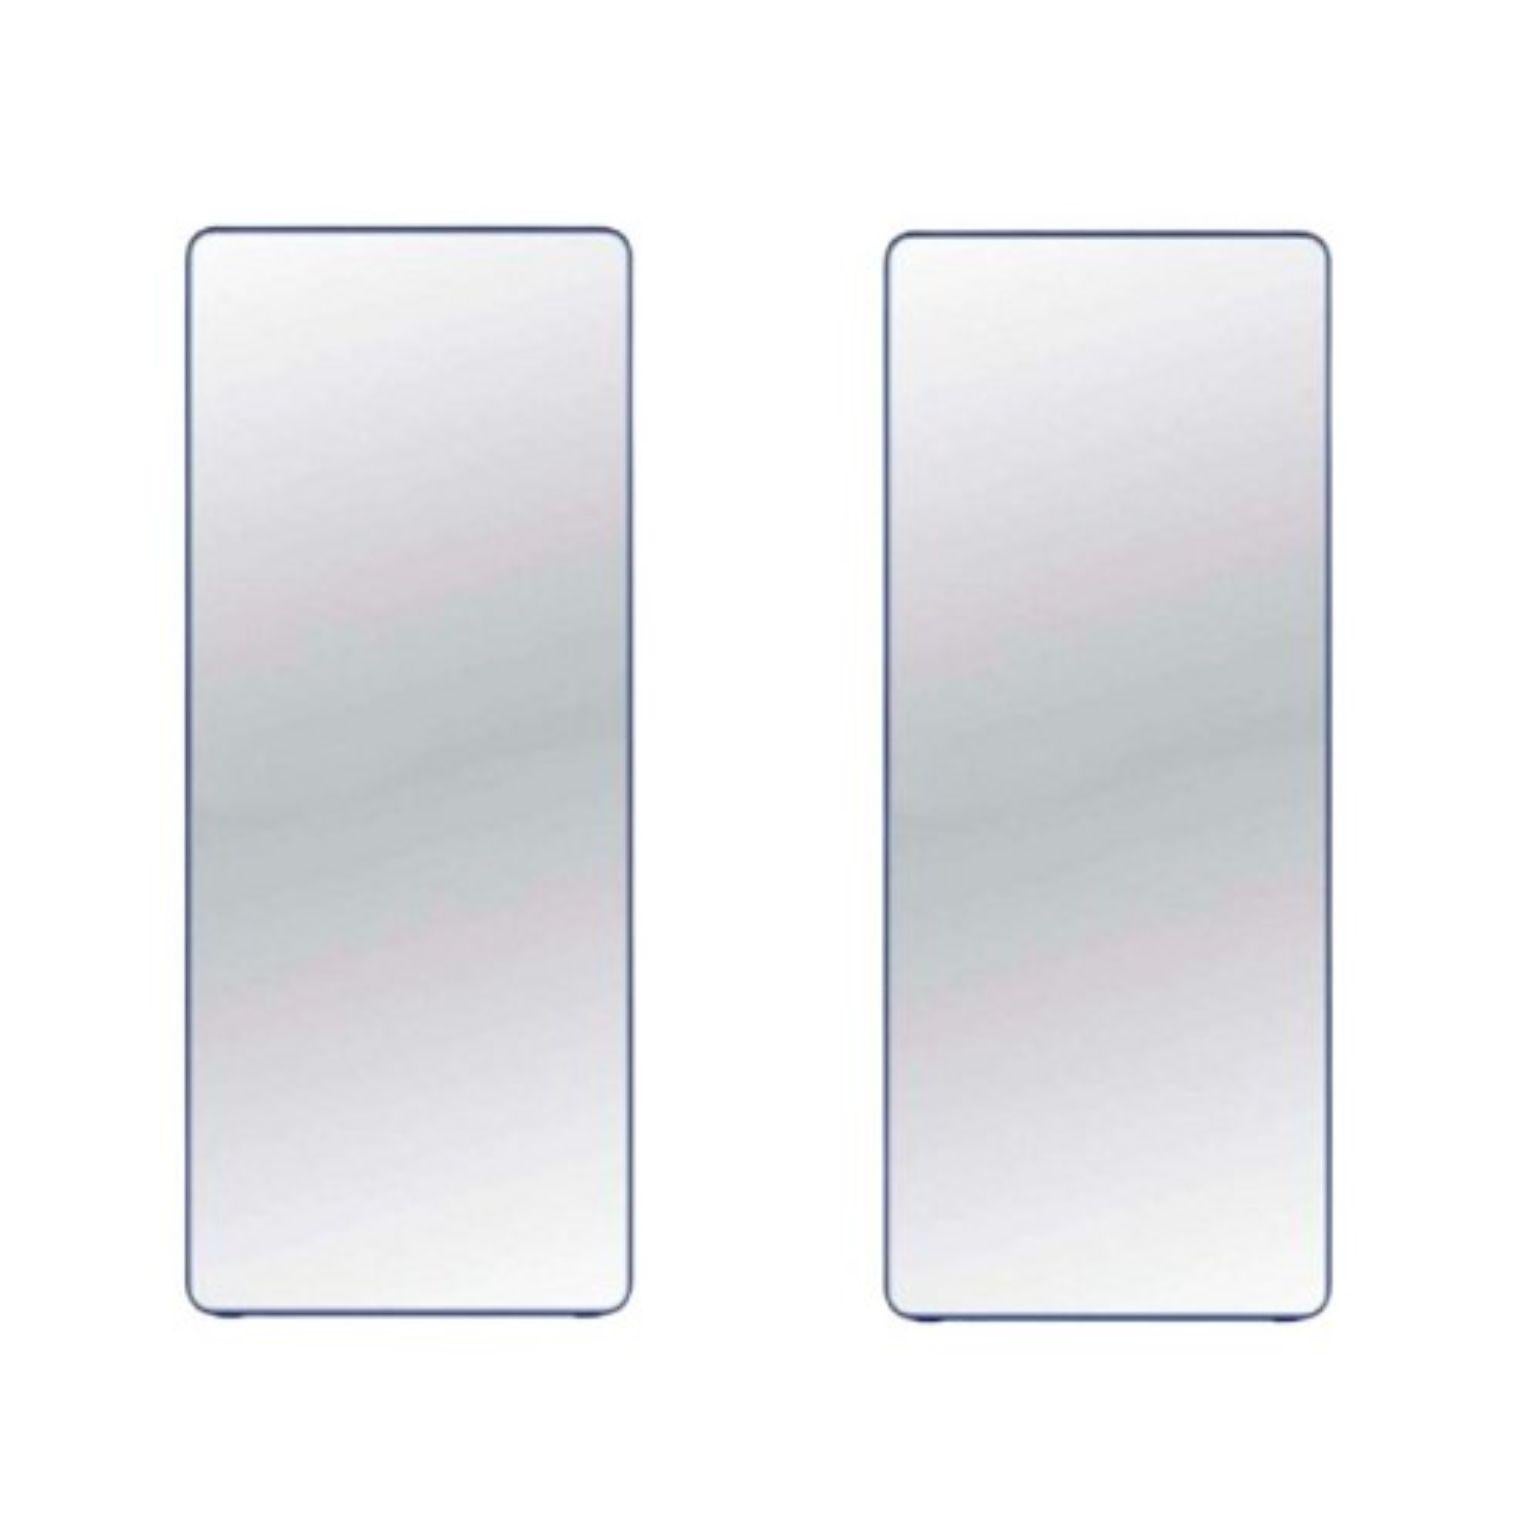 Set of 2 Loveself 05 Mirrors by Oito
Dimensions: D70 x W4 x H180 cm
Materials:MDF(Hungary), ecological water painted., mirror

LOVESELF is a collection of mirrors created by our team of designers oito design . The mission of our collection is to